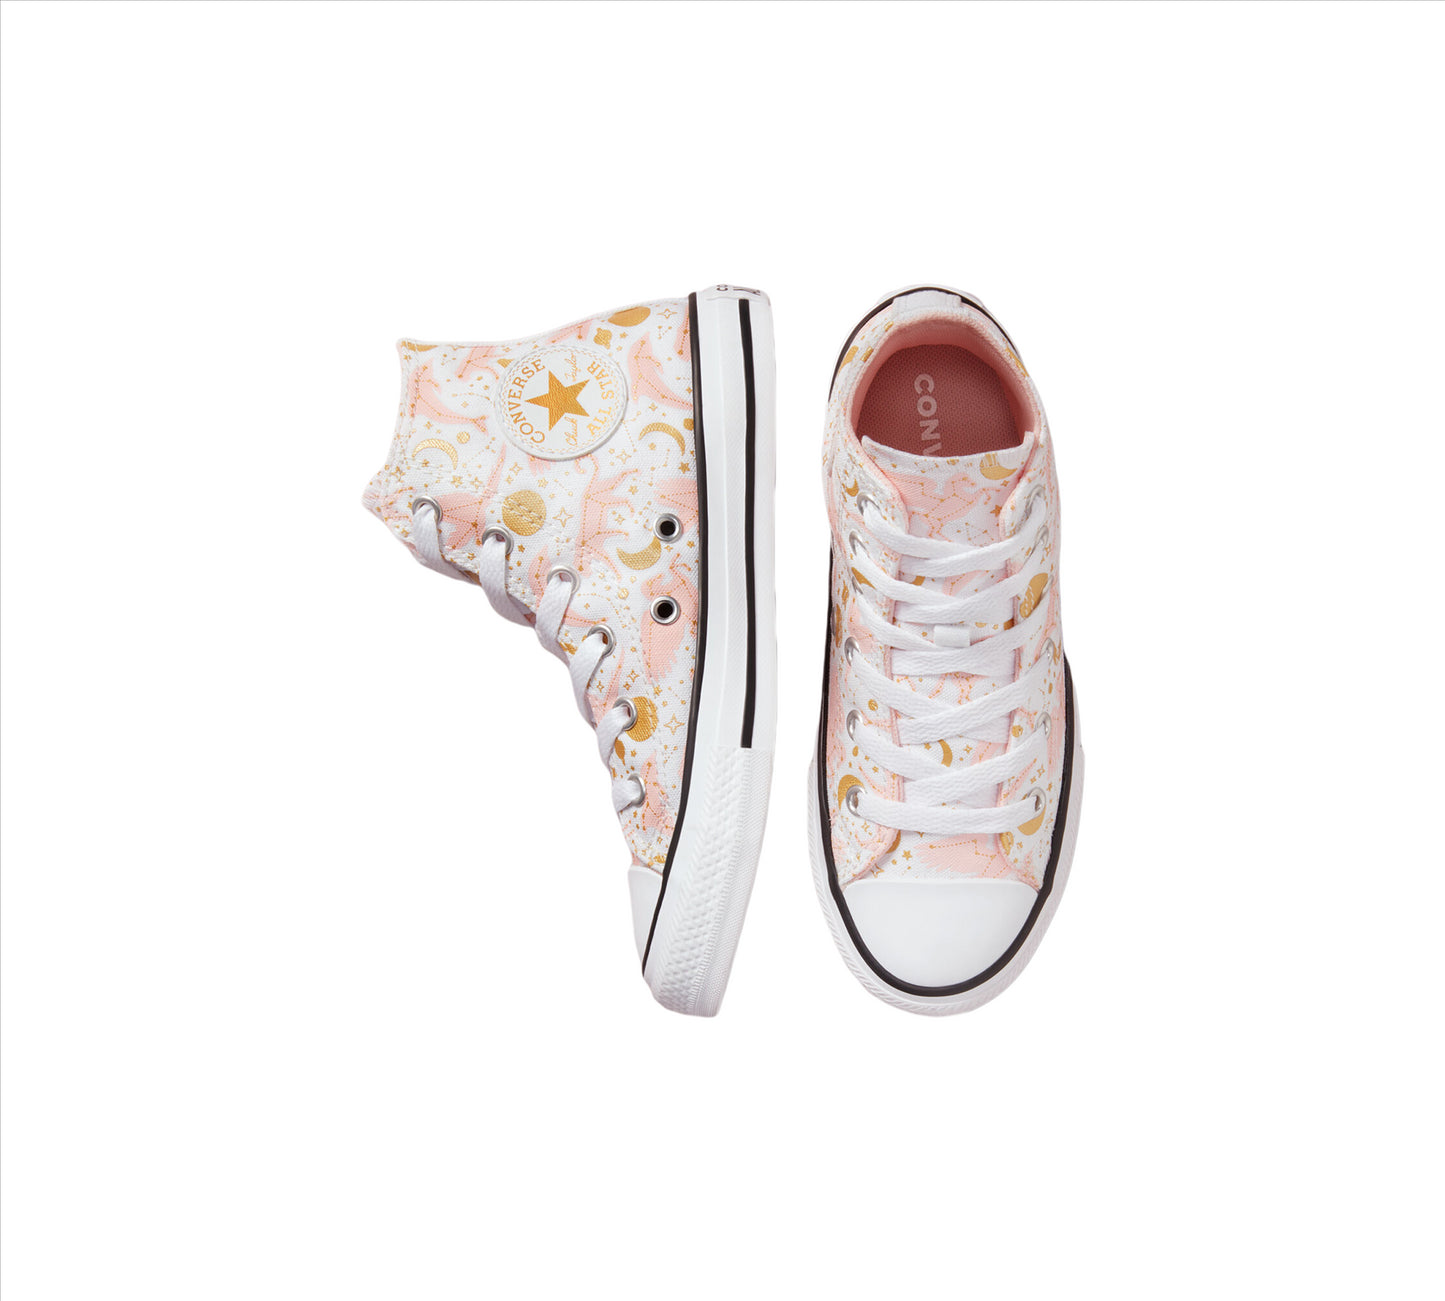 Converse Constellations Chuck Taylor Junior All Star 672221C Shoes White/Storm/Pink UK 10-5.5